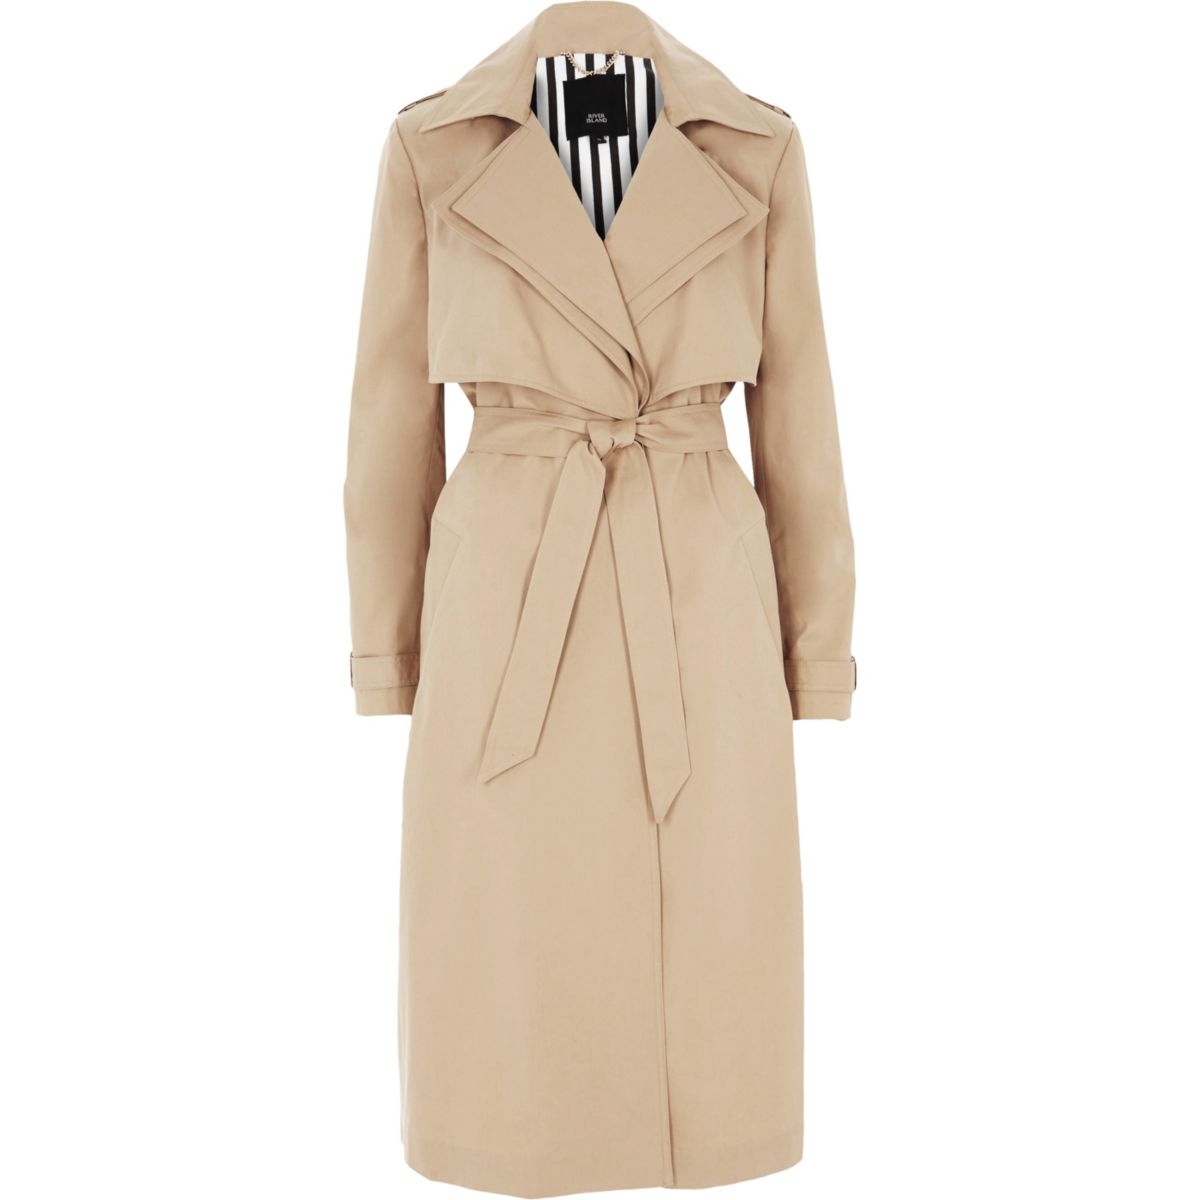 River Island Double Collar Long Trench Coat